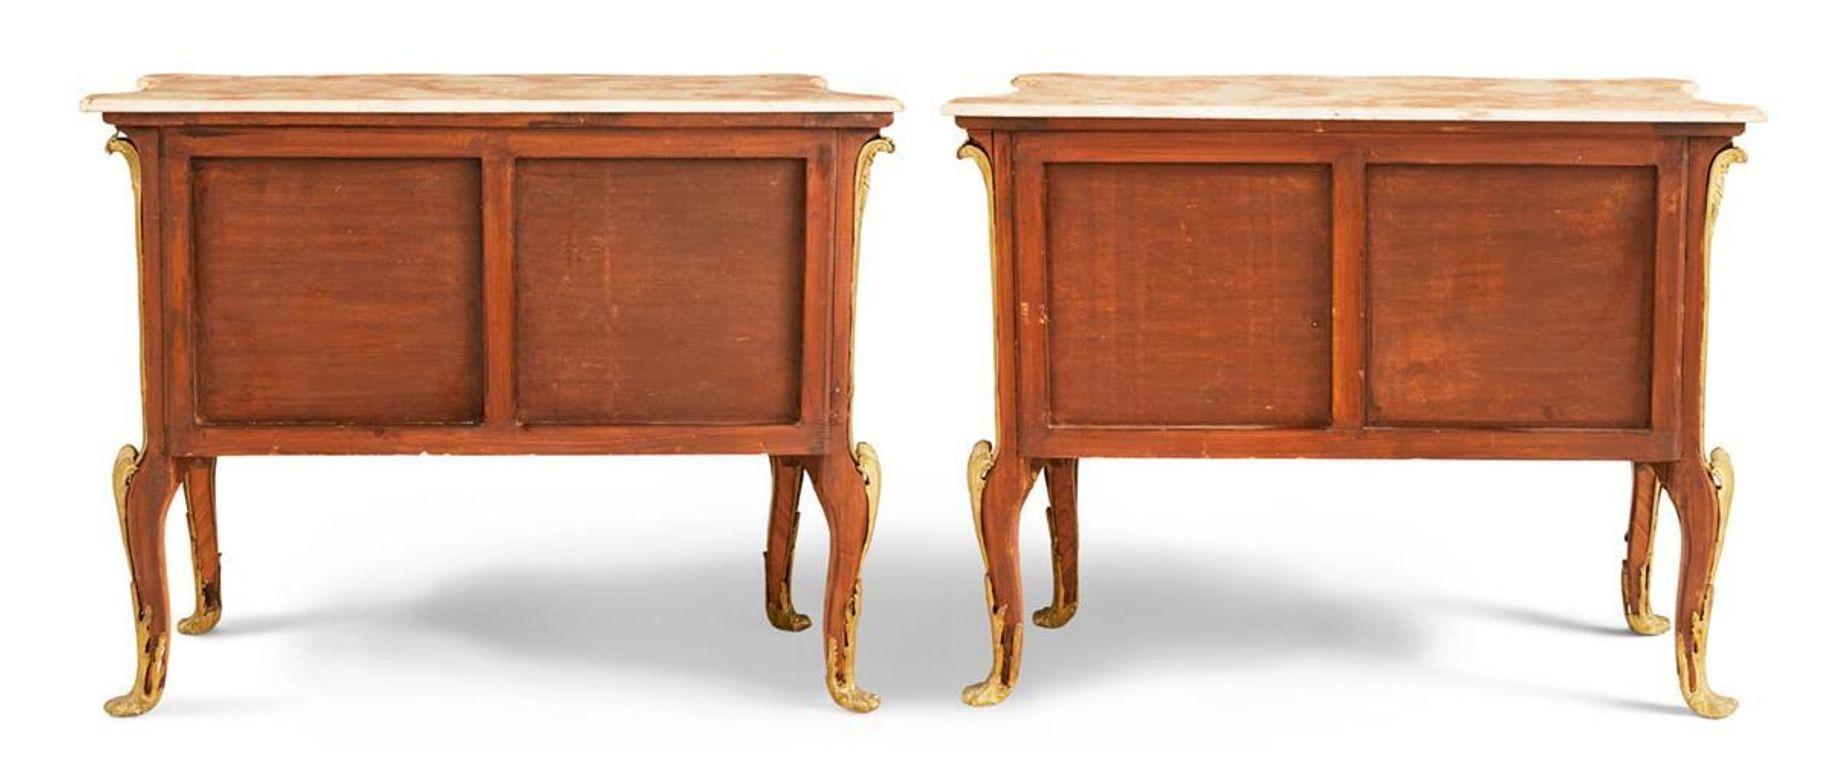 Pair of French Kingwood Bronze Mounted Commodes / Chest of Drawers, Nightstands For Sale 14